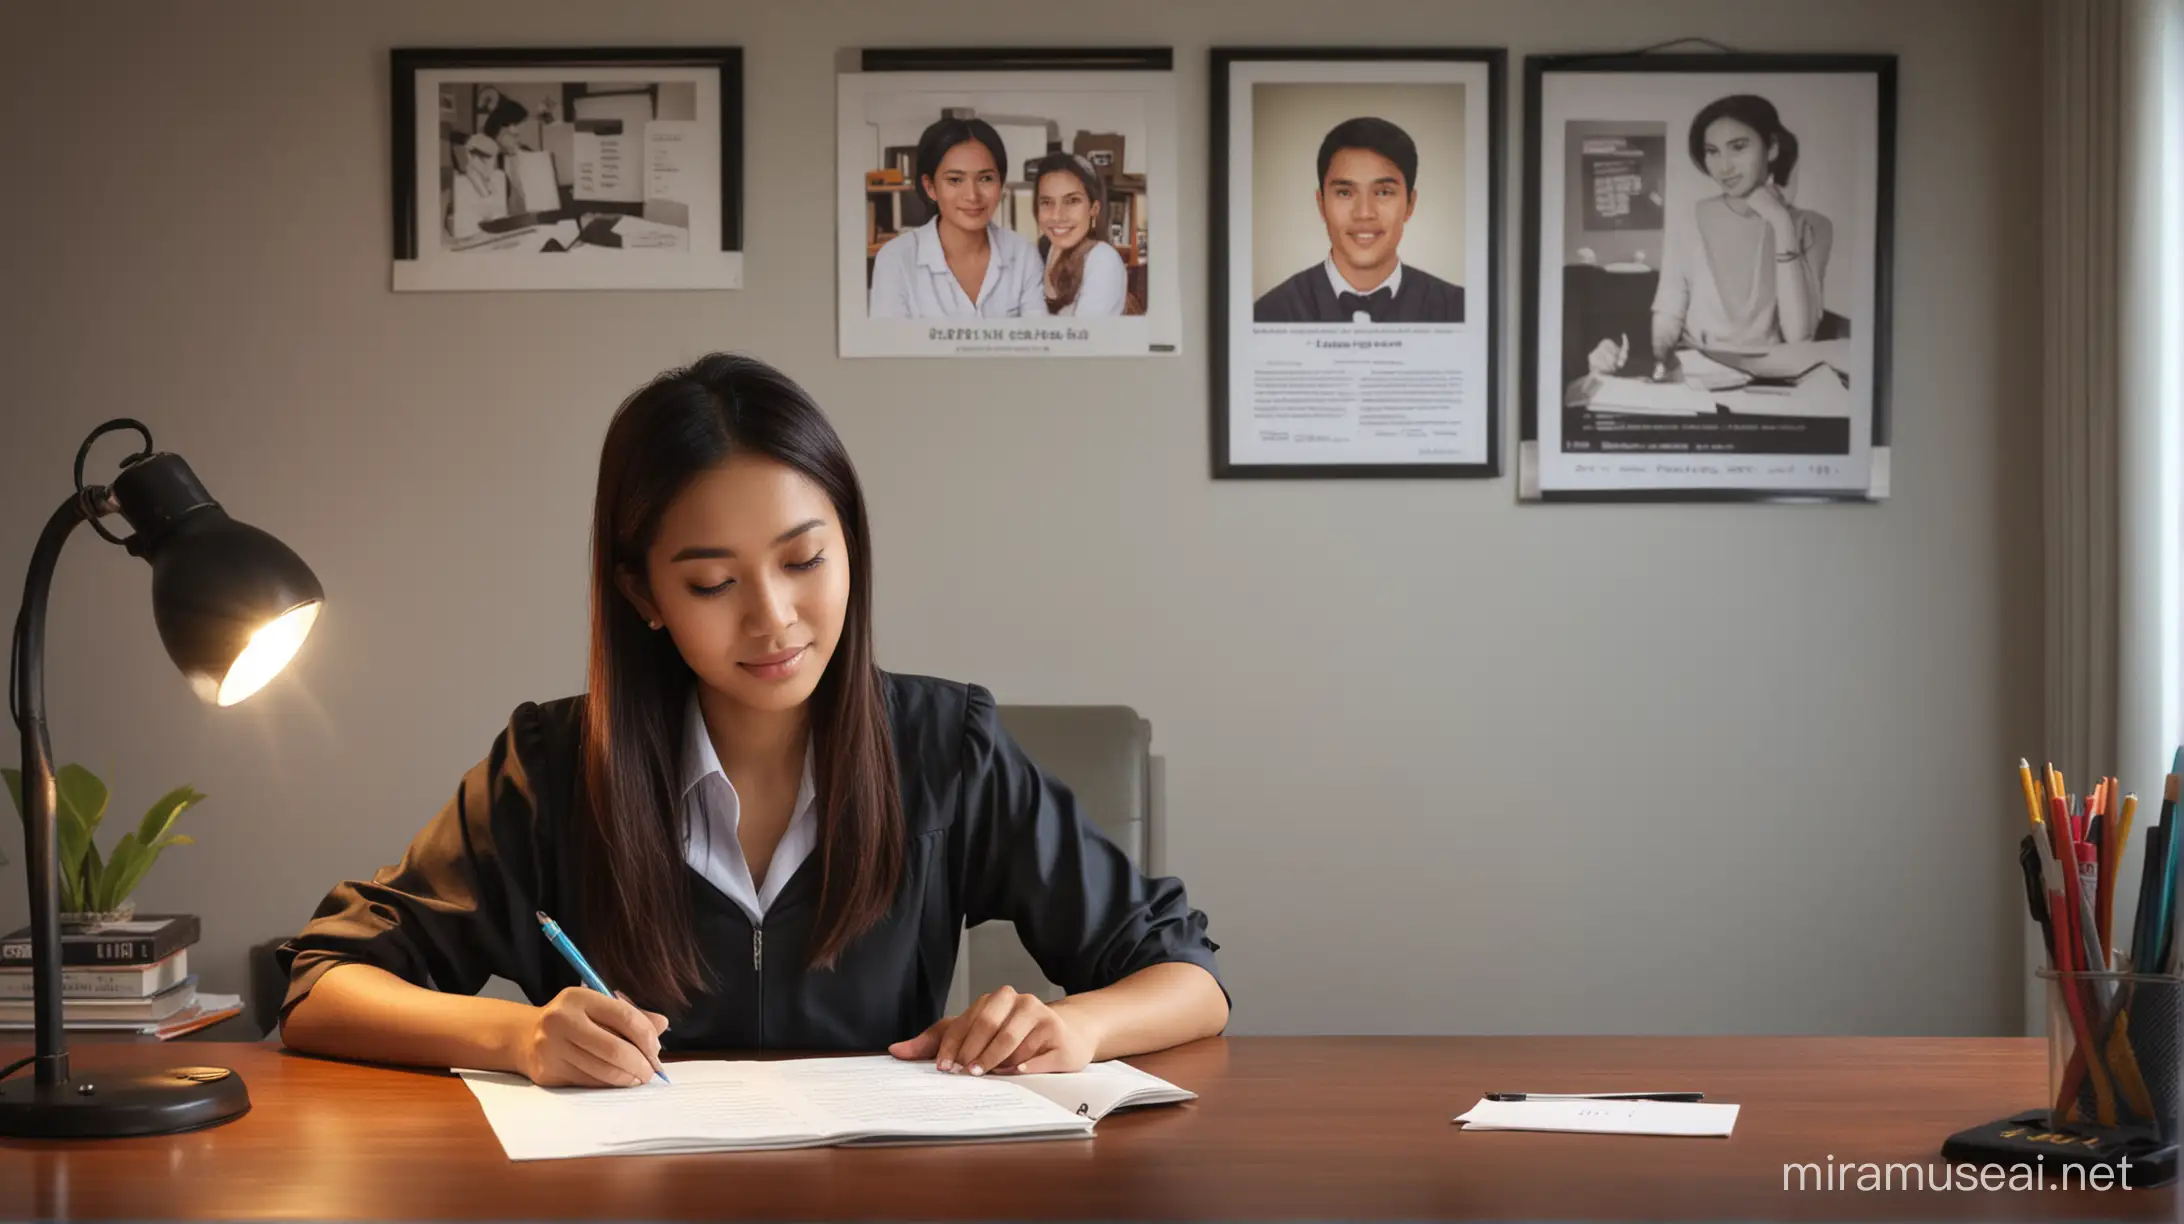 Create an HDR quality photo-realistic image of an Indonesian woman, in her 20s, writing a curriculum vitae letter. The woman is sitting at a desk, in front of which is a reading lamp. The background is a neat room with a graduation photo on the wall.